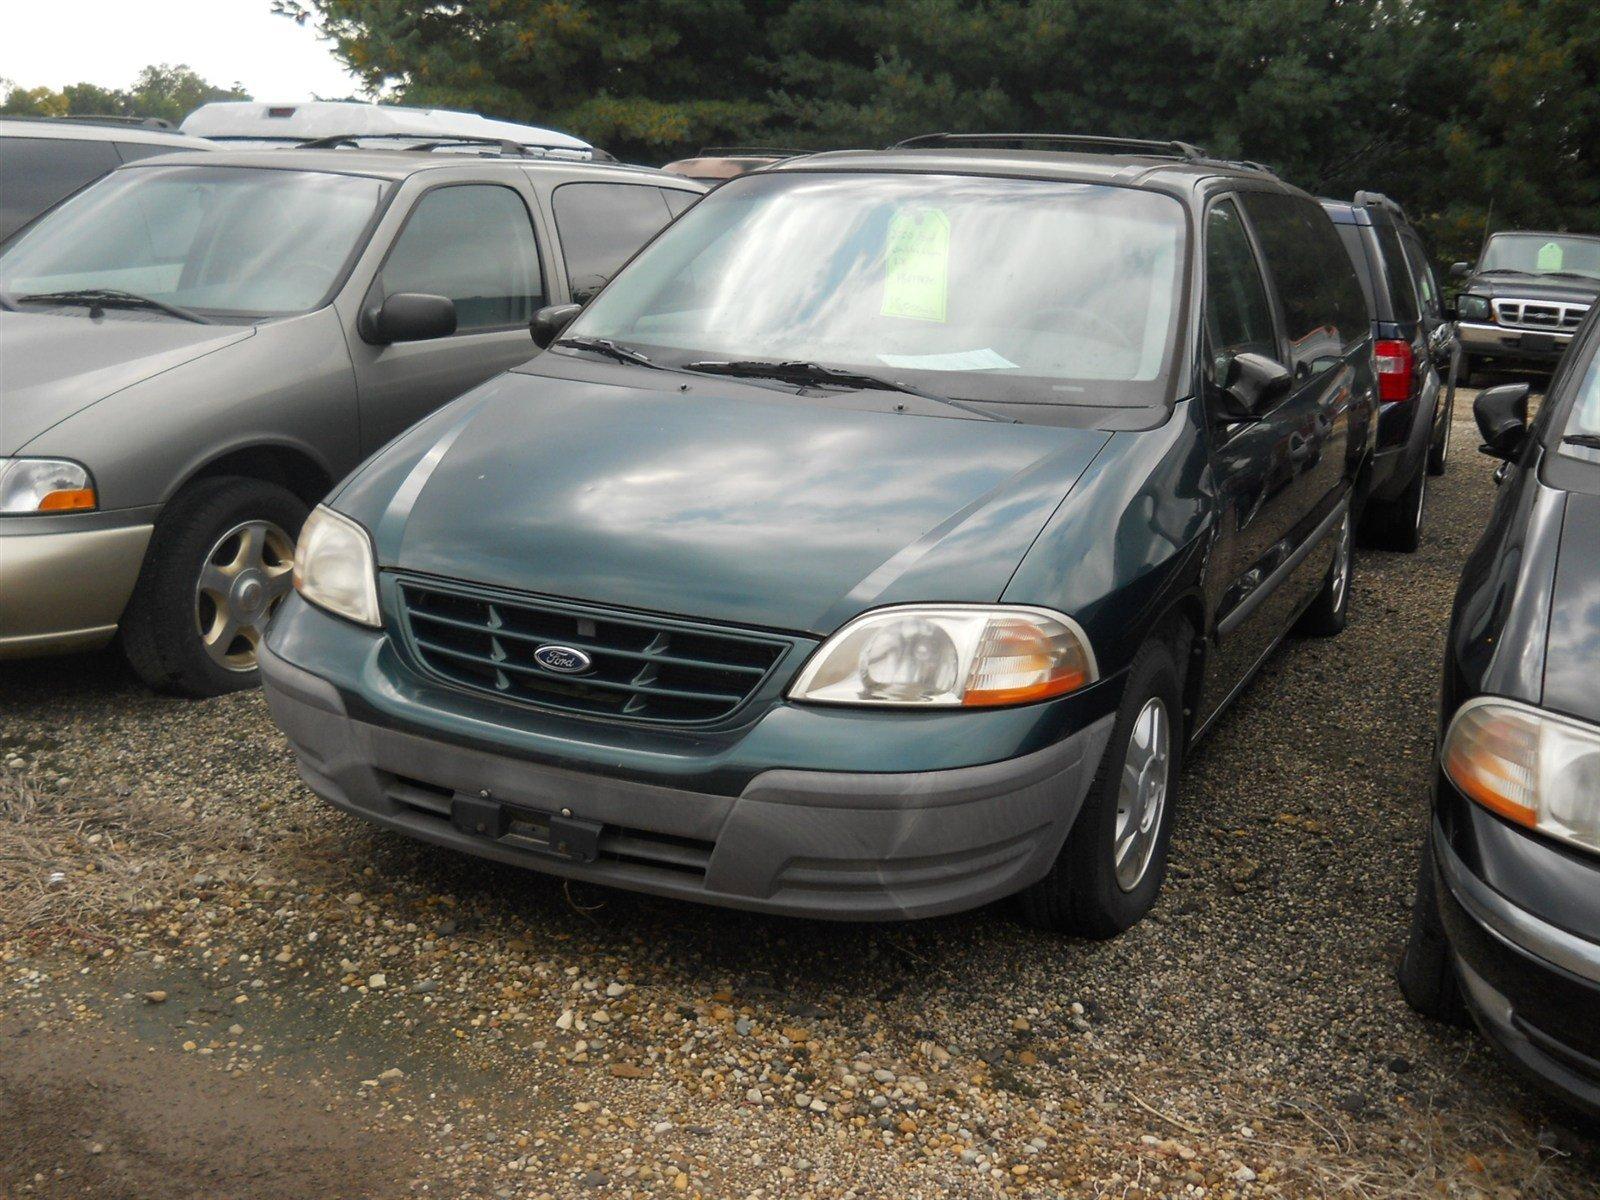 Used 2000 Ford Windstar LX with VIN 2FMZA5148YBA19470 for sale in Delavan, IL